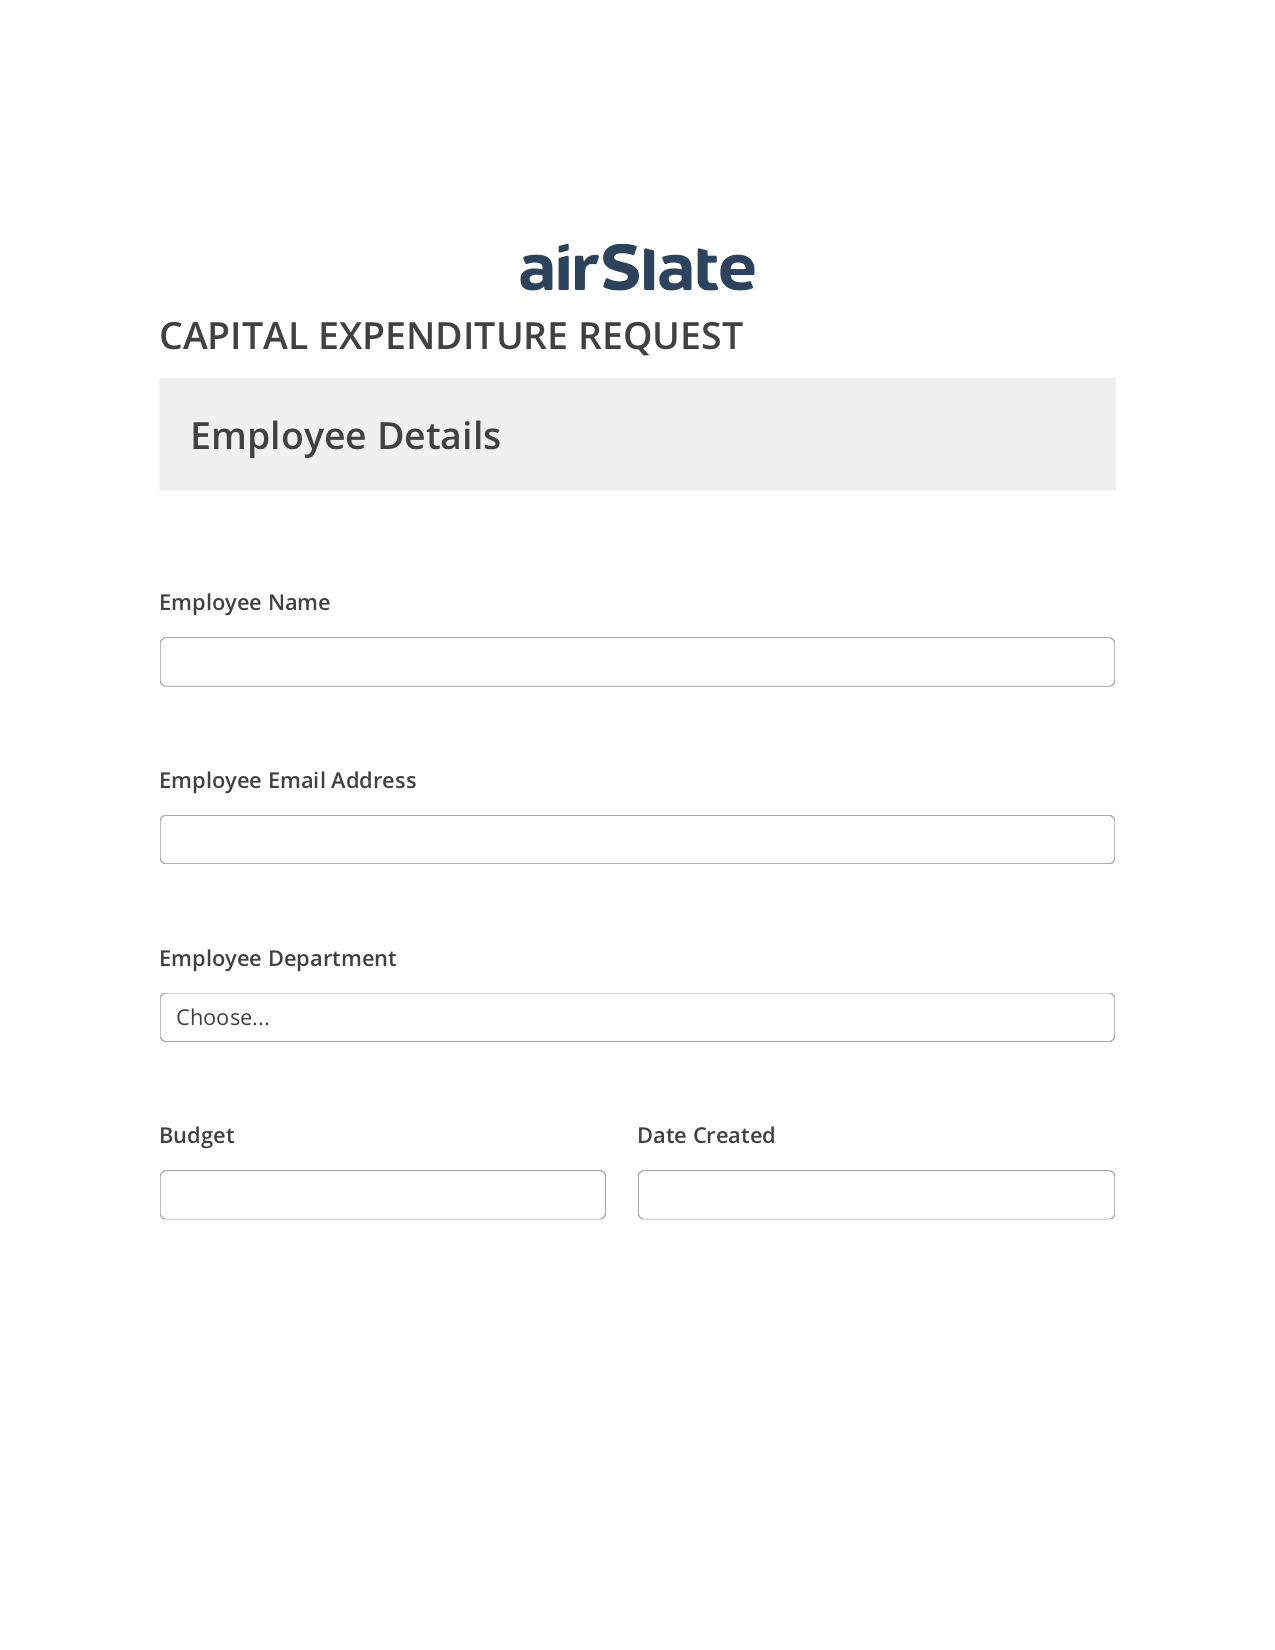 Capital Expenditure Request Approval Workflow Pre-fill from Salesforce Record Bot, Slack Notification Bot, Slack Notification Postfinish Bot